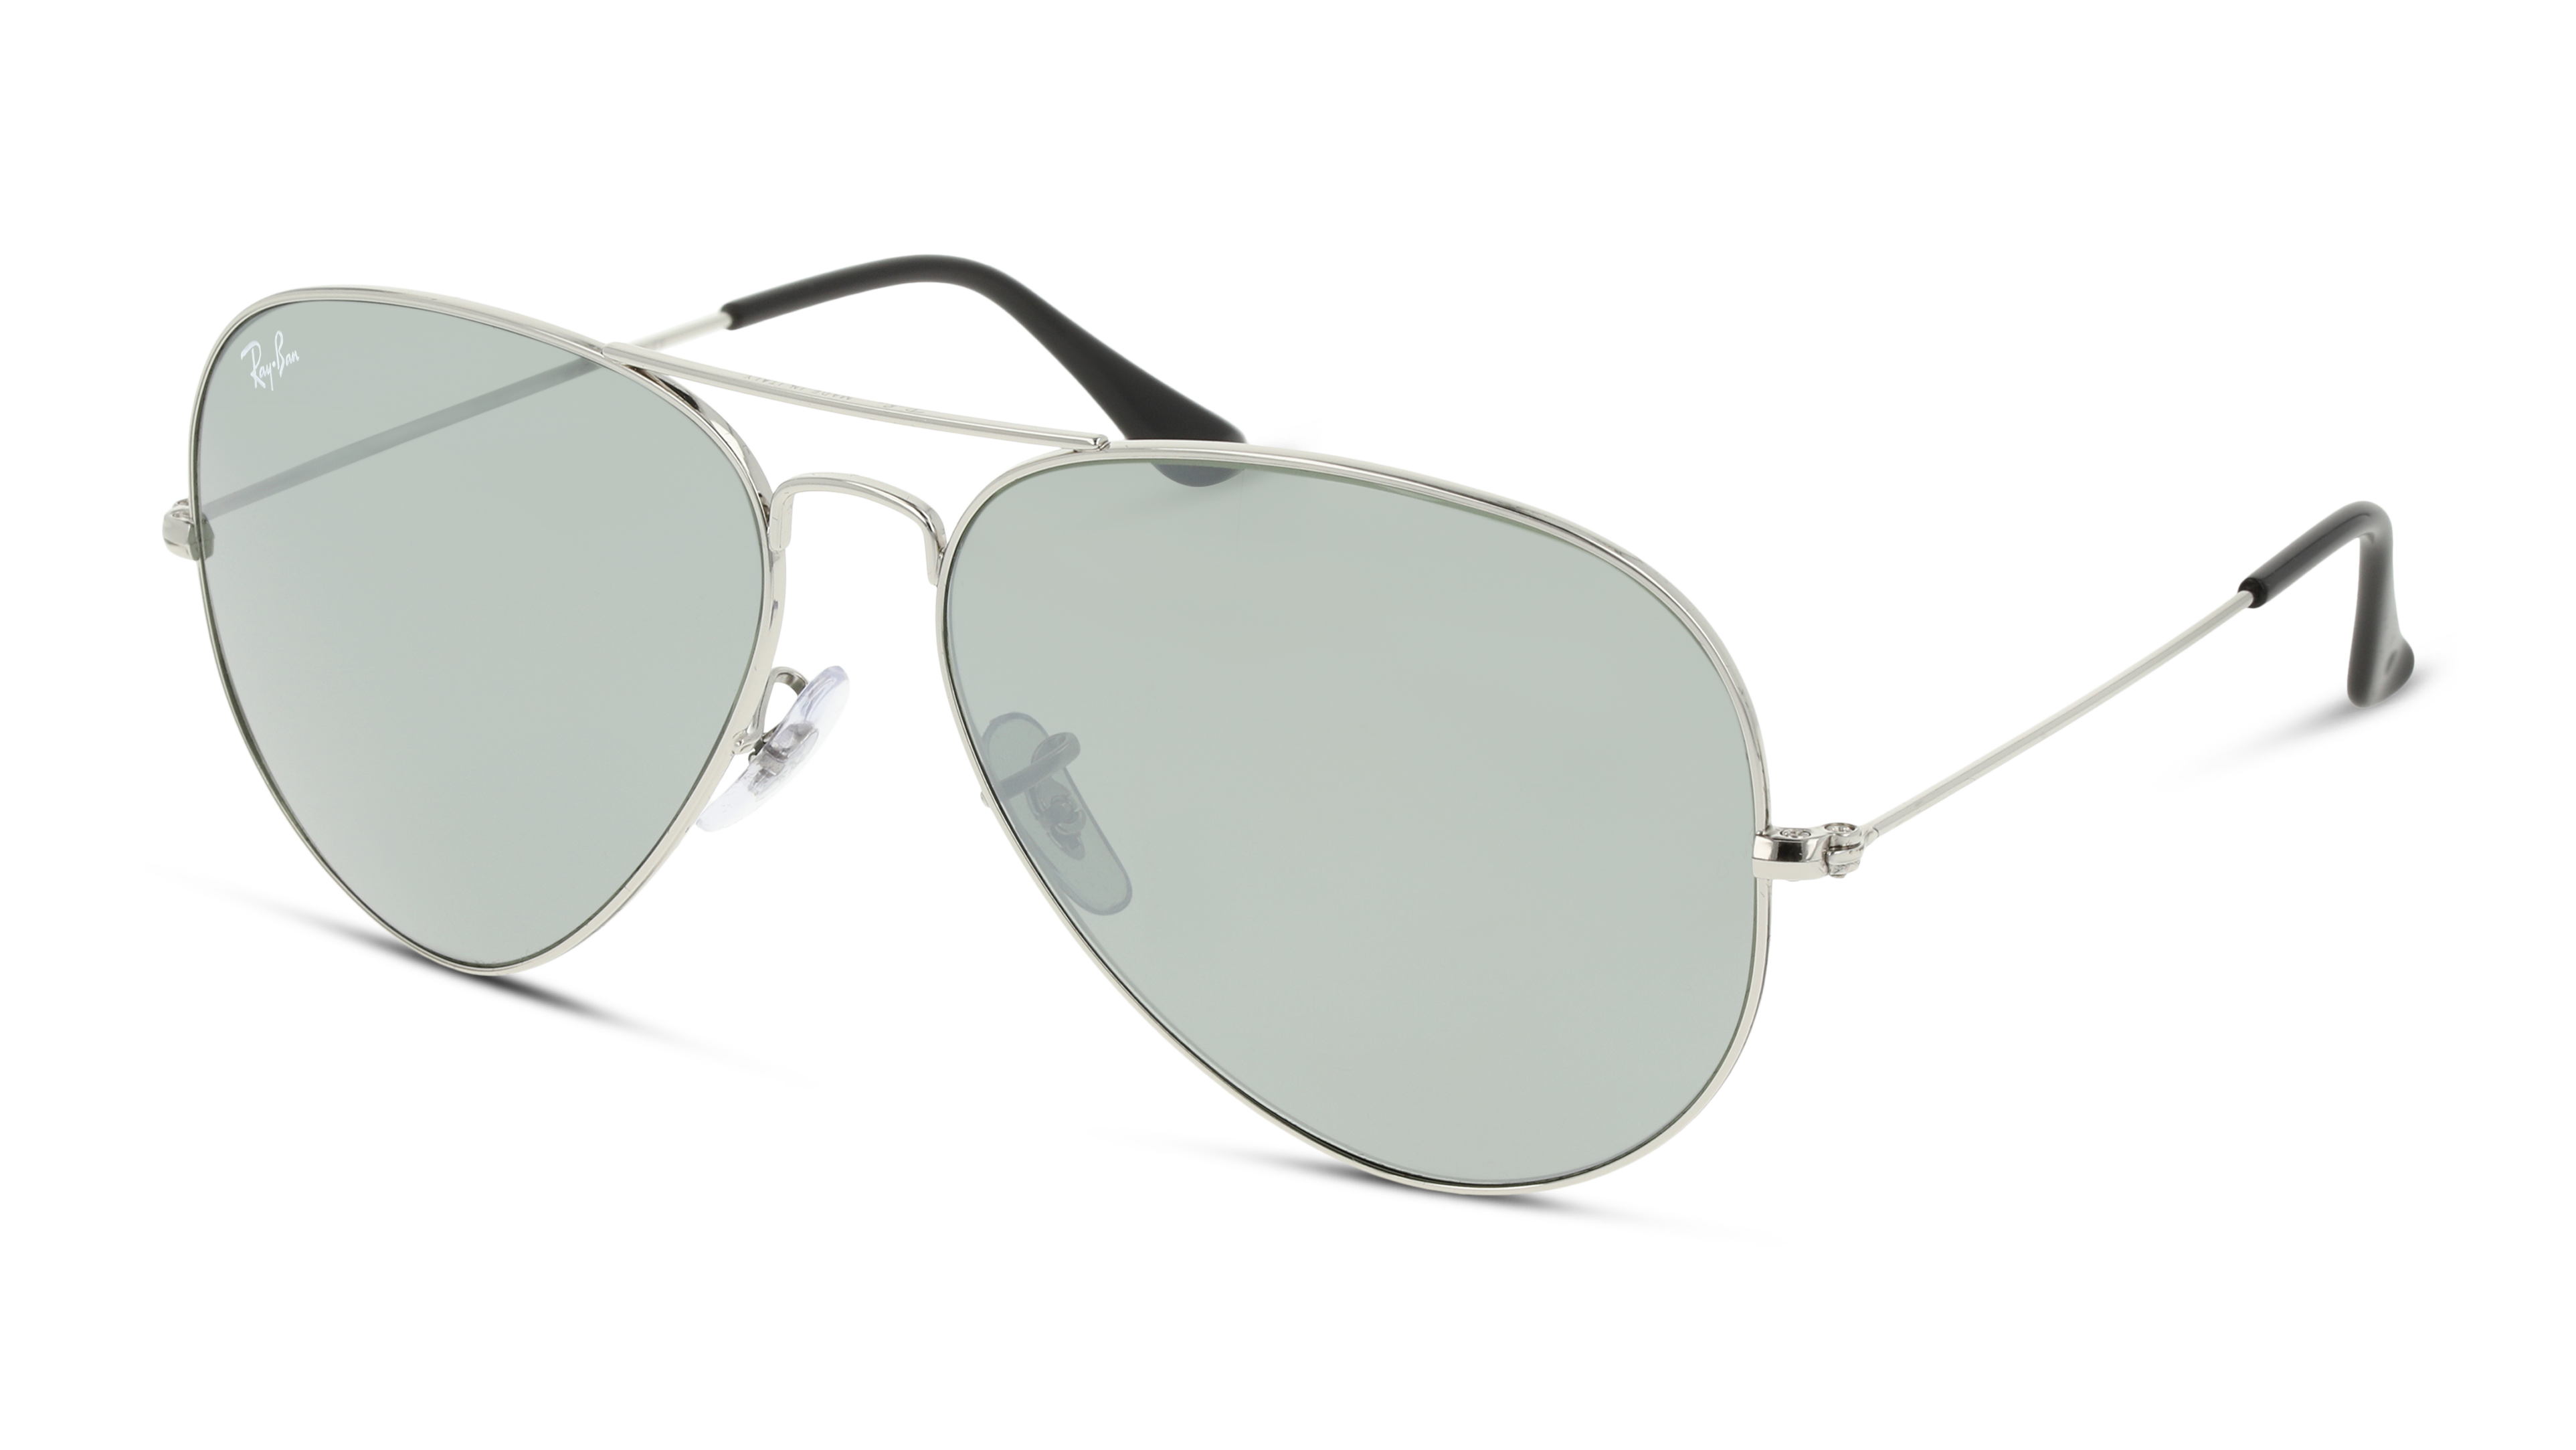 Angle_Left01 Ray-Ban Aviator Mirror RB3025 003/40 Grijs / Zilver